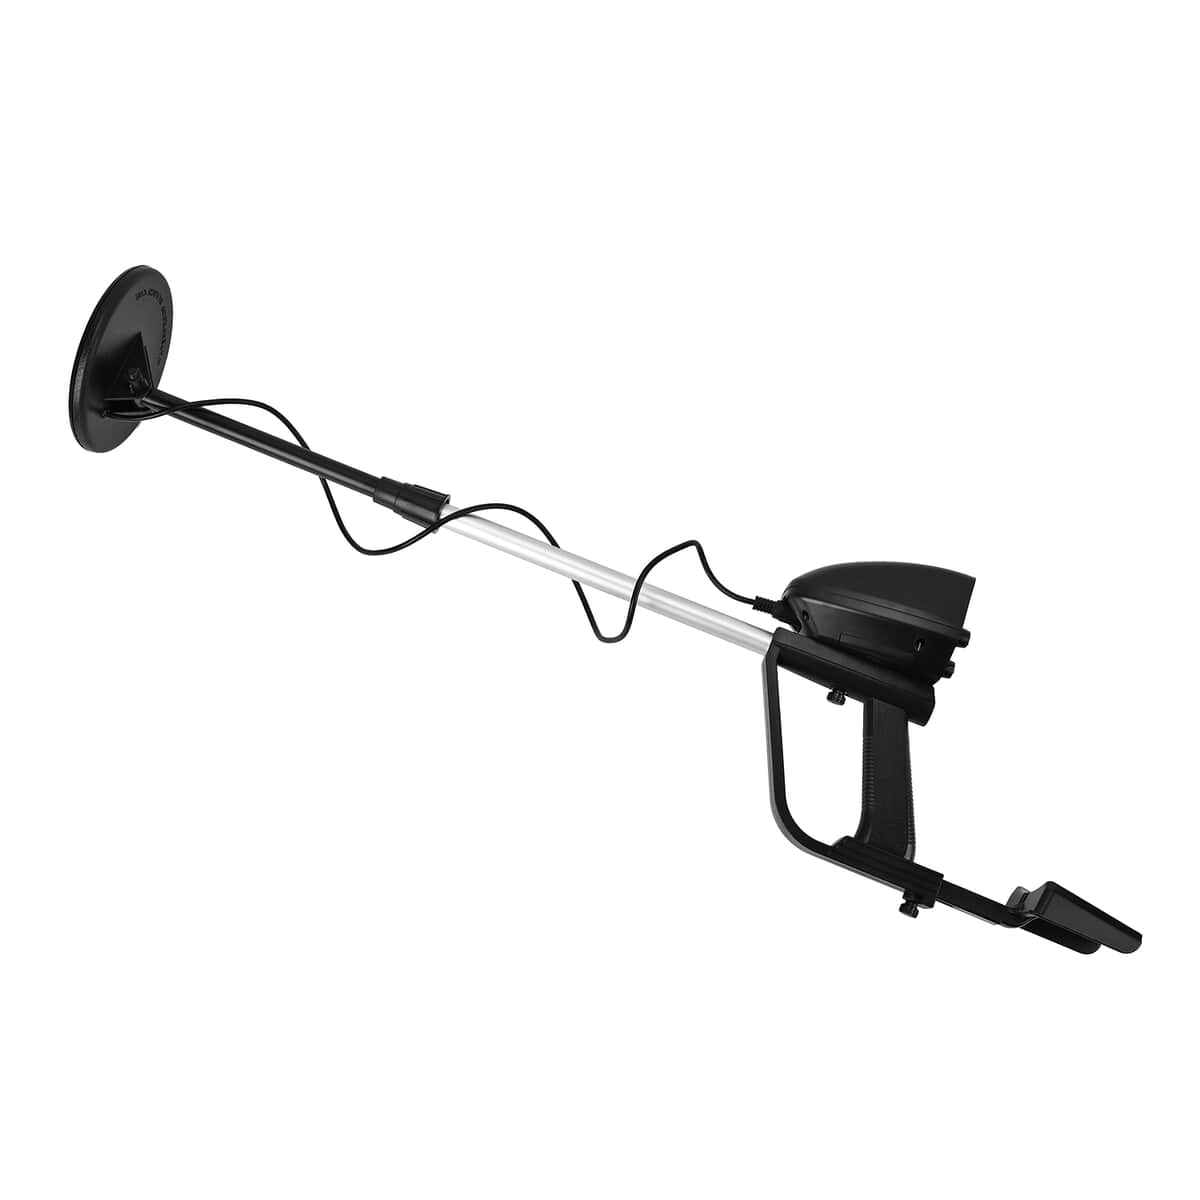 Underground Metal Detector with Headphone, Adjustable Height, Detection Indicator Alert (Two Option Modes- Disc and all Metal) image number 0